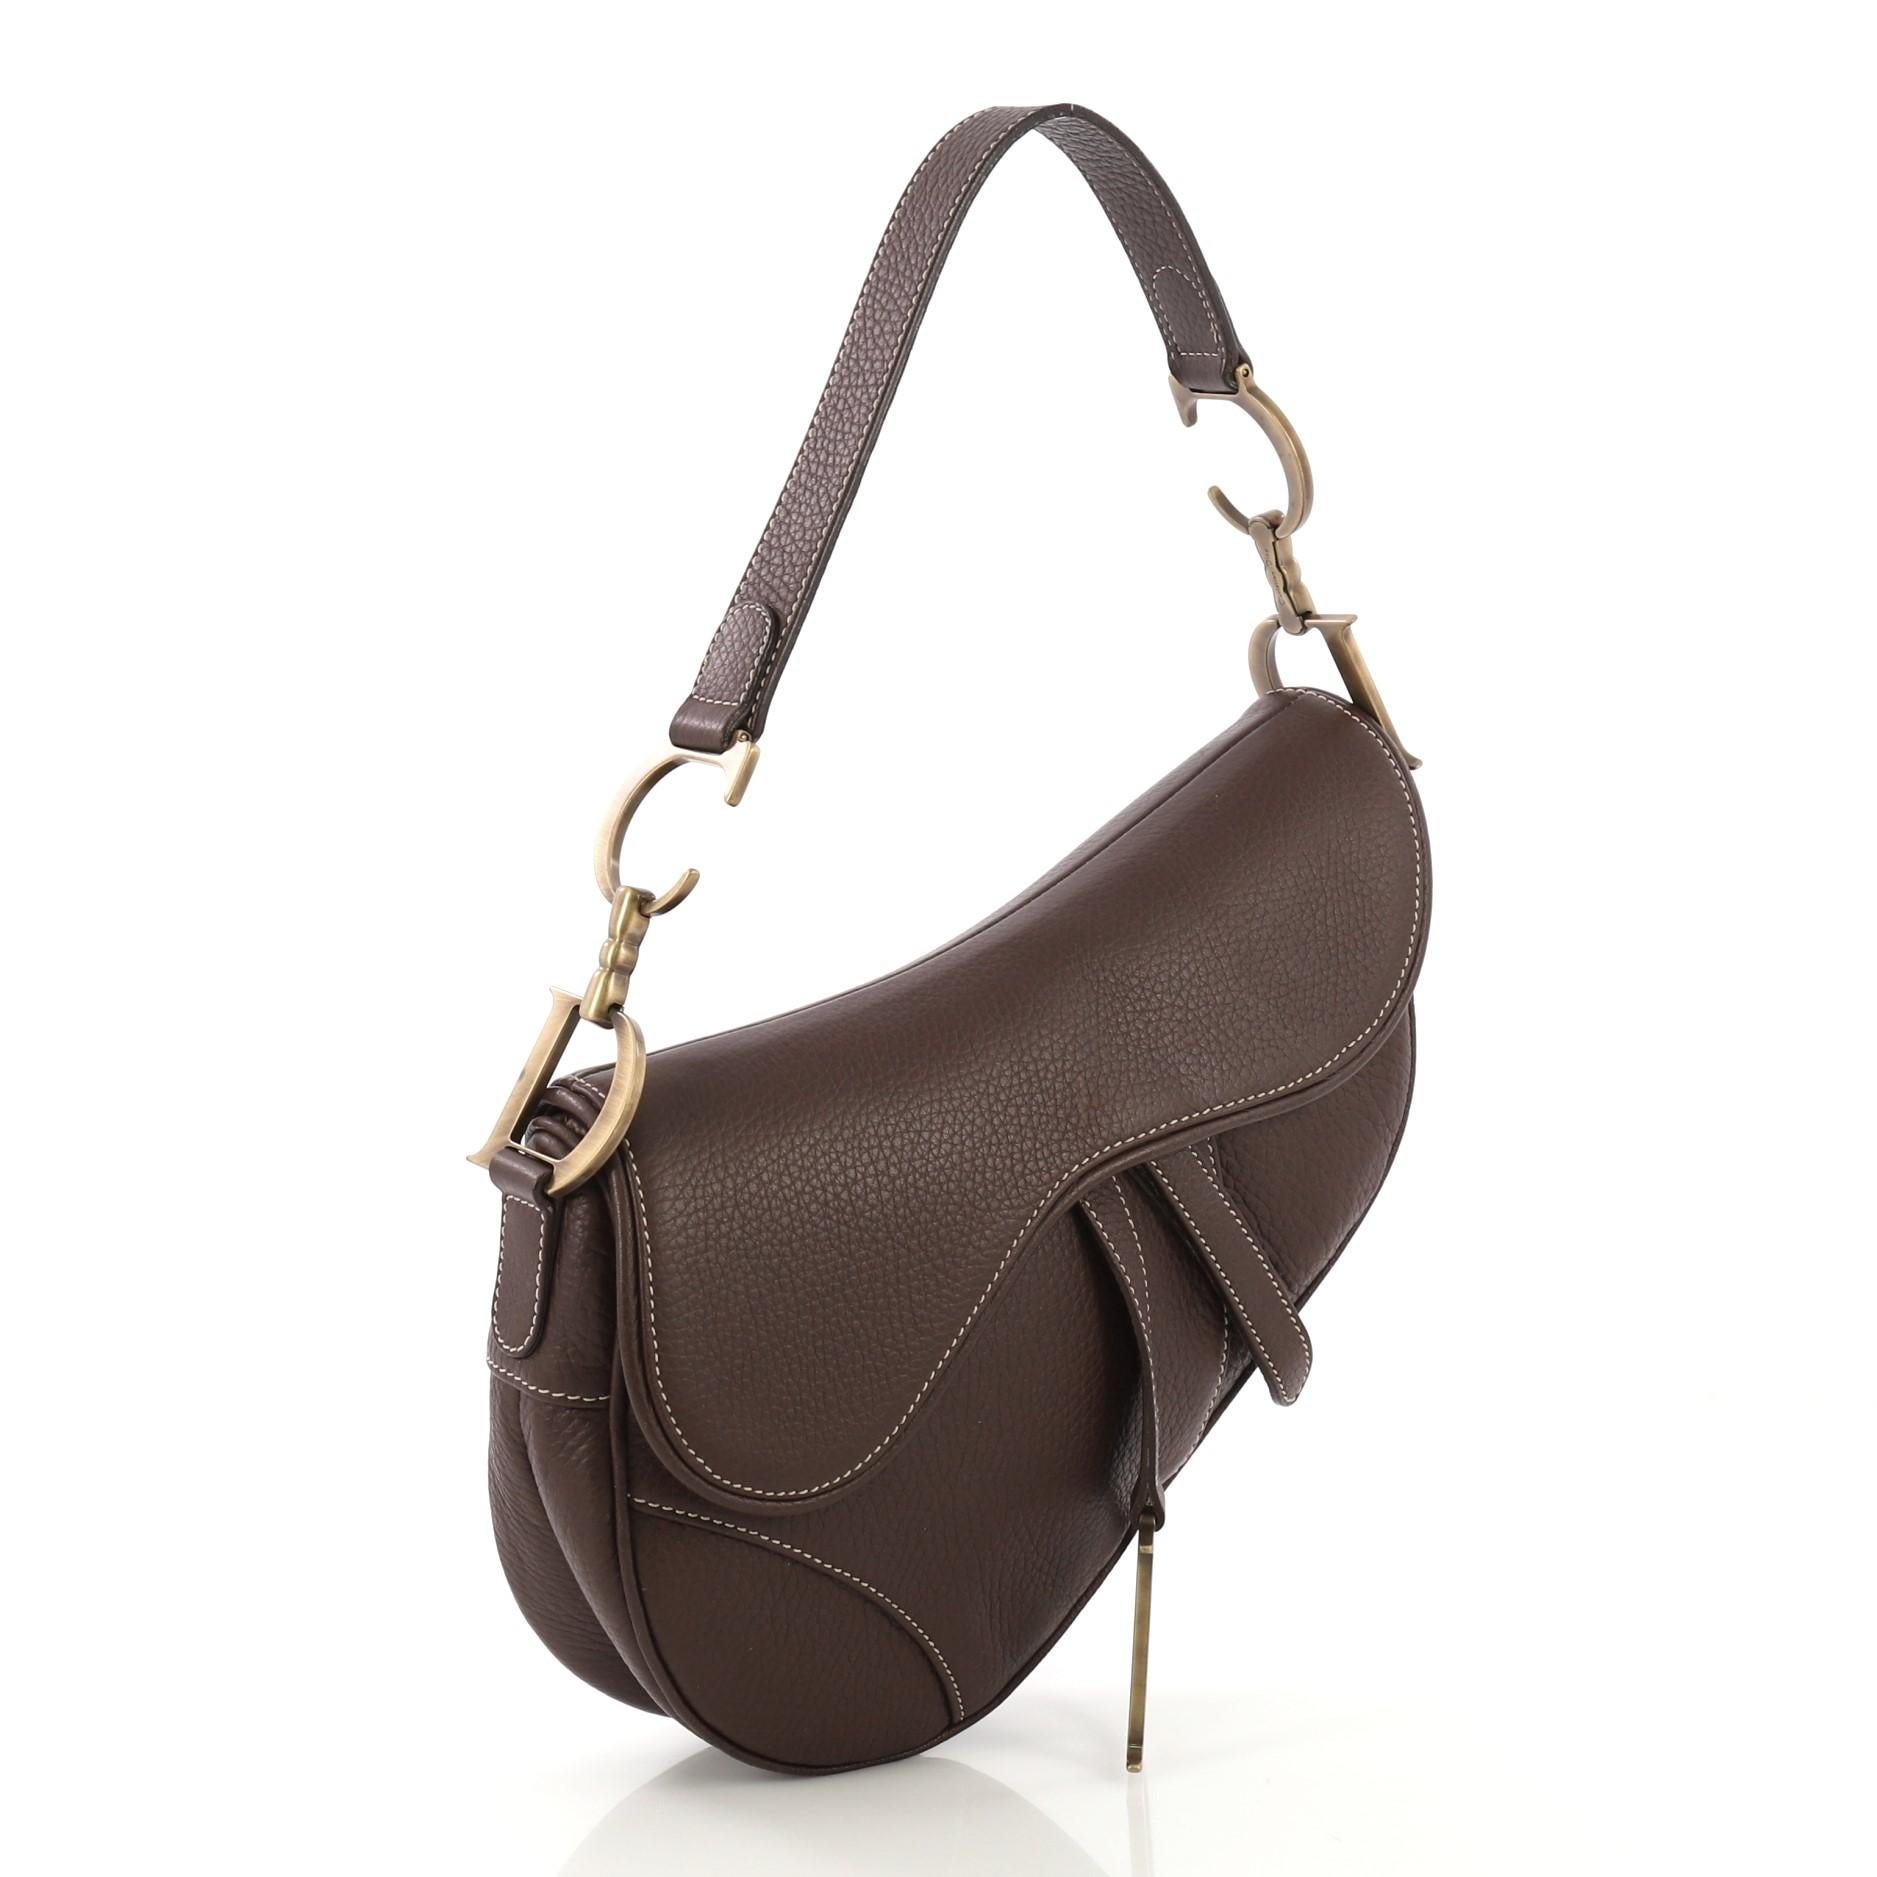 This Christian Dior Vintage Saddle Bag Leather Medium, crafted from brown leather, features a top handle adorned with metal 'CD' finishing, saddle-shaped silhouette, and aged gold-tone hardware. Its fold over top opens to a brown fabric interior